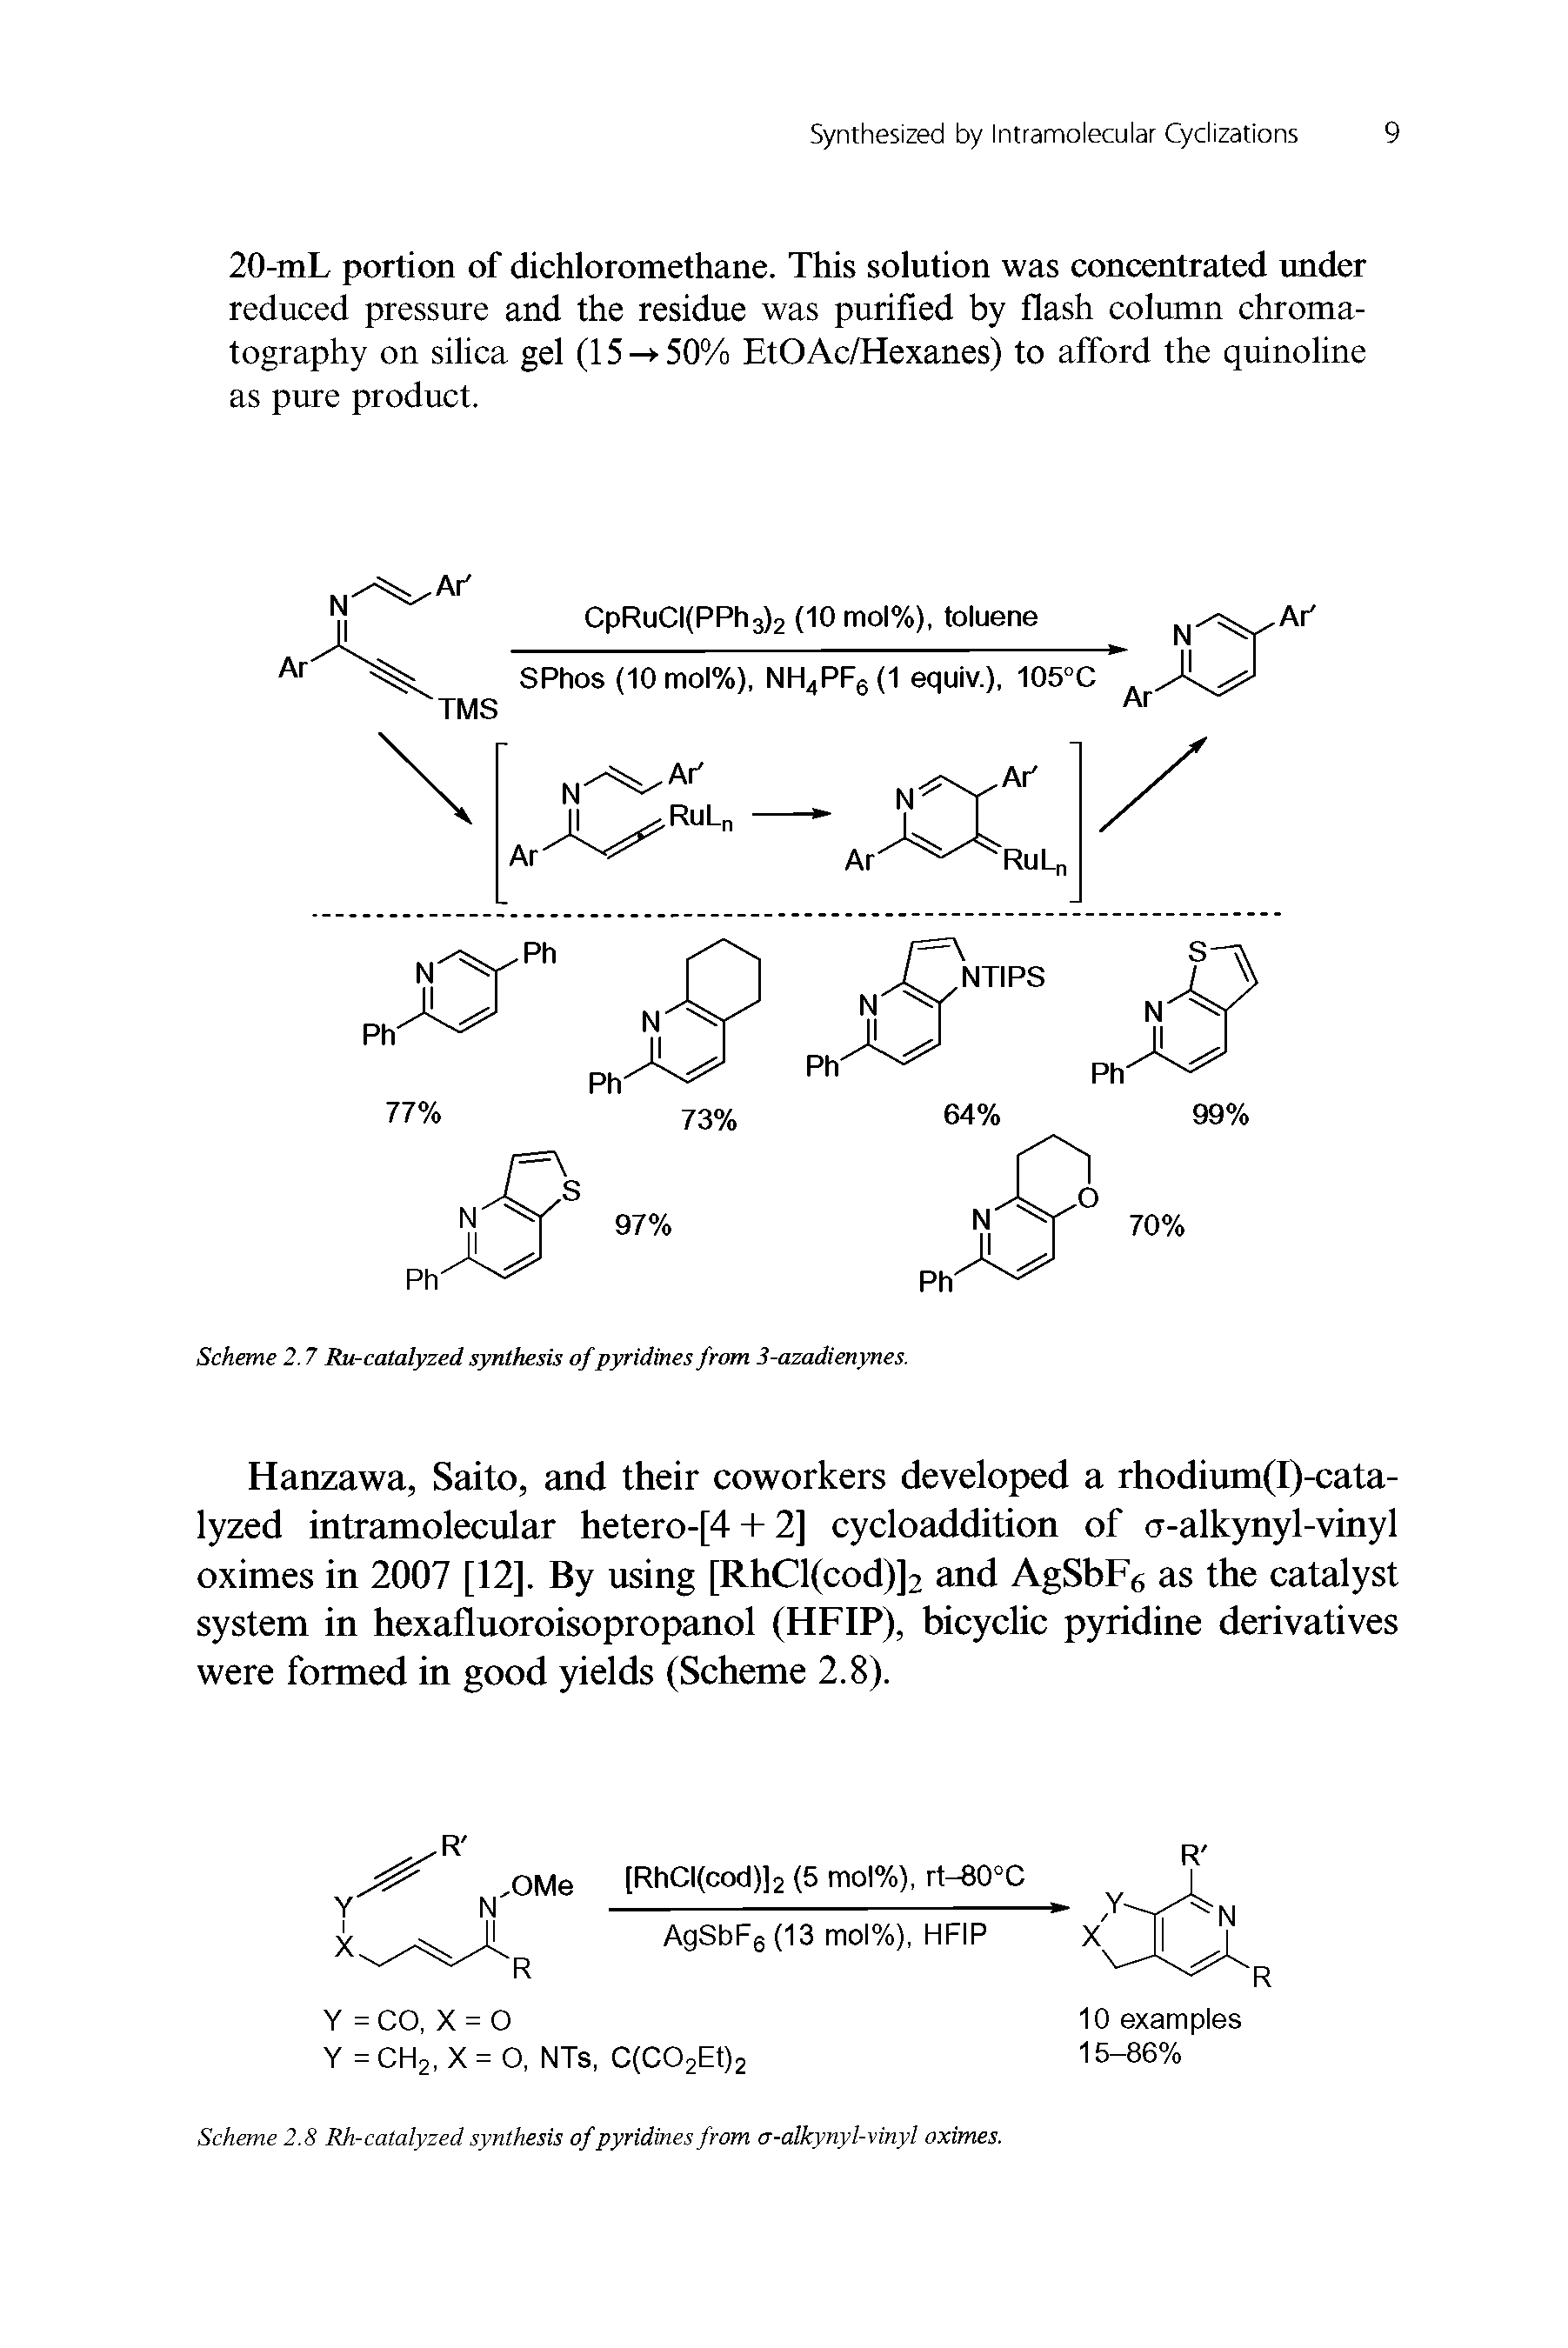 Scheme 2.8 Rh-catalyzed synthesis of pyridines from a-alkynyl-vinyl oximes.